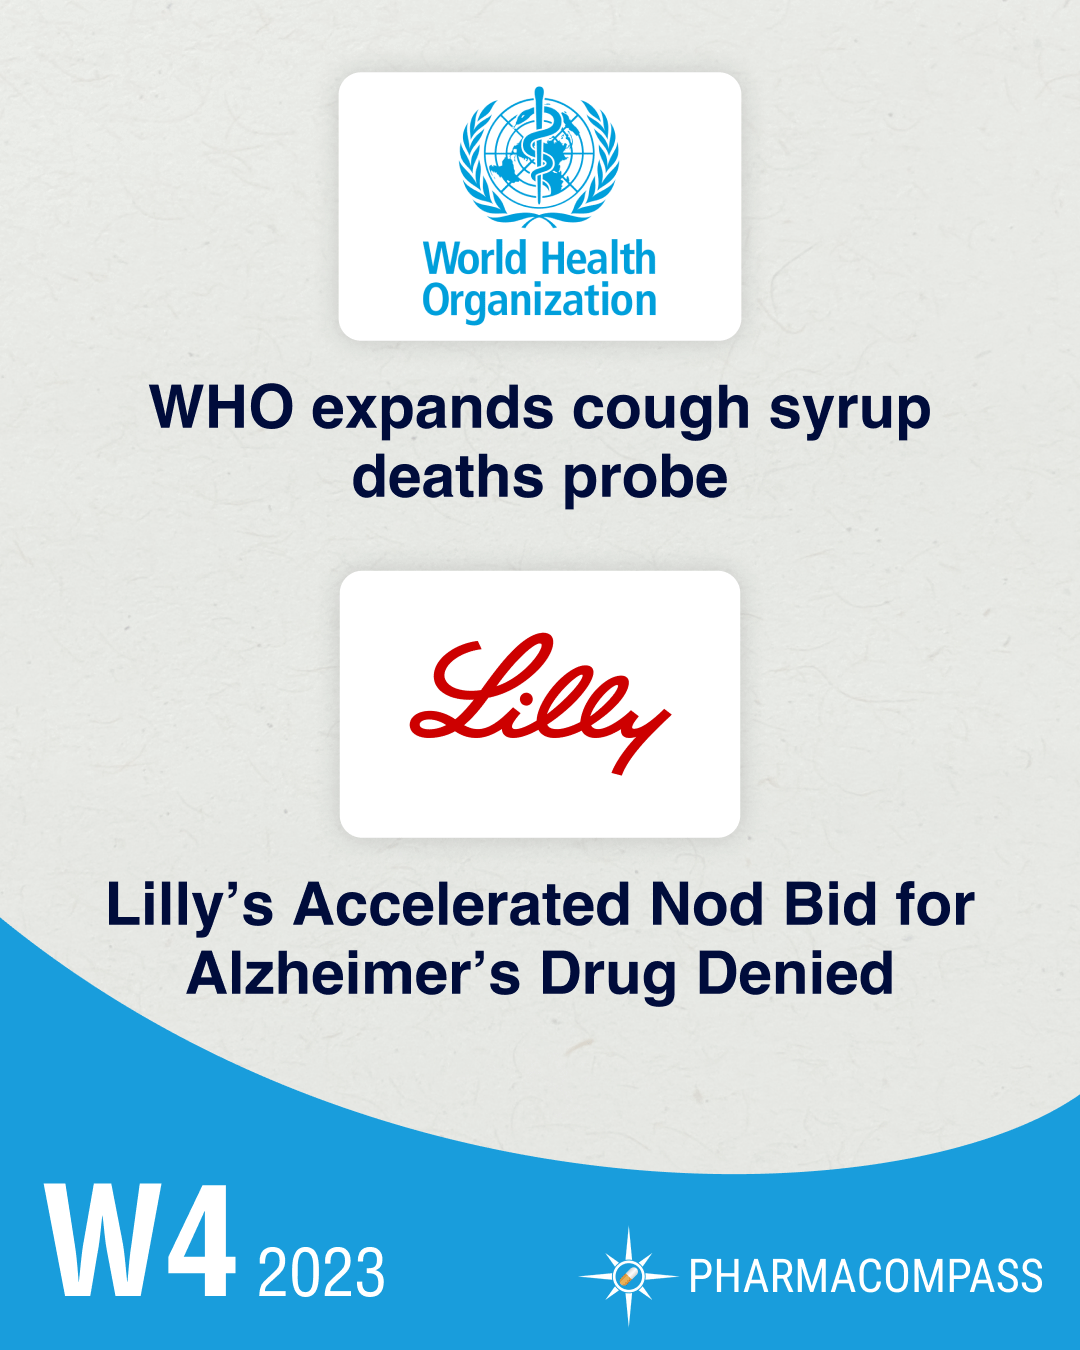 WHO expands cough syrup deaths probe; FDA rejects Lilly’s accelerated nod request for Alzheimer’s drug